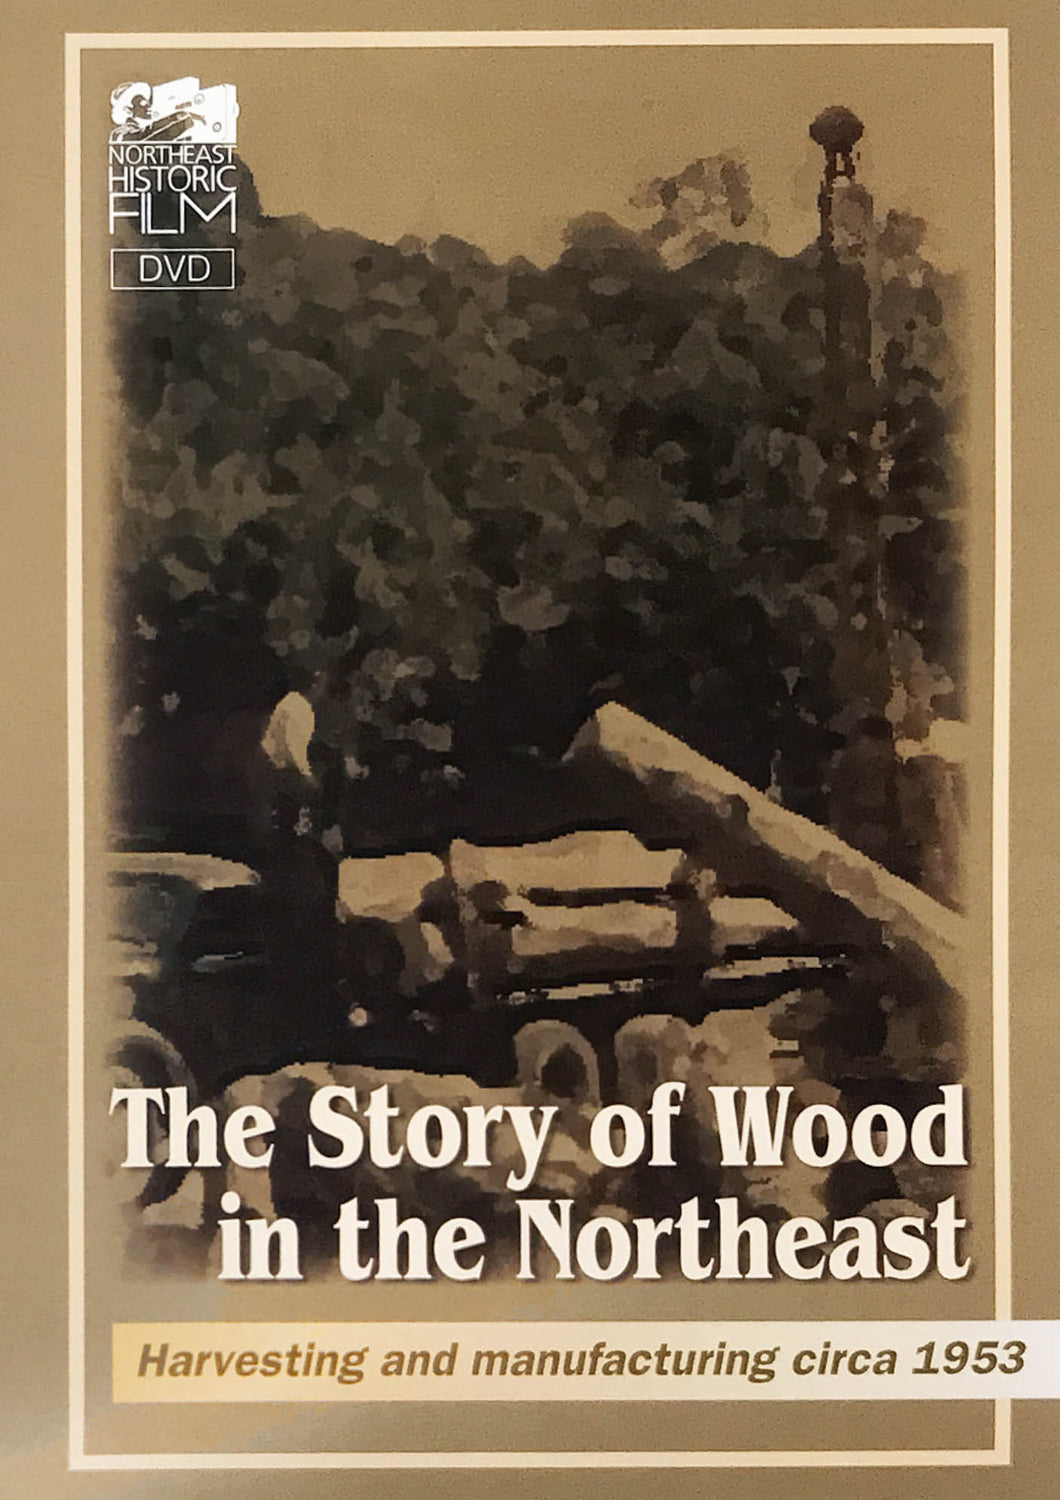 The Story of Wood in the Northeast